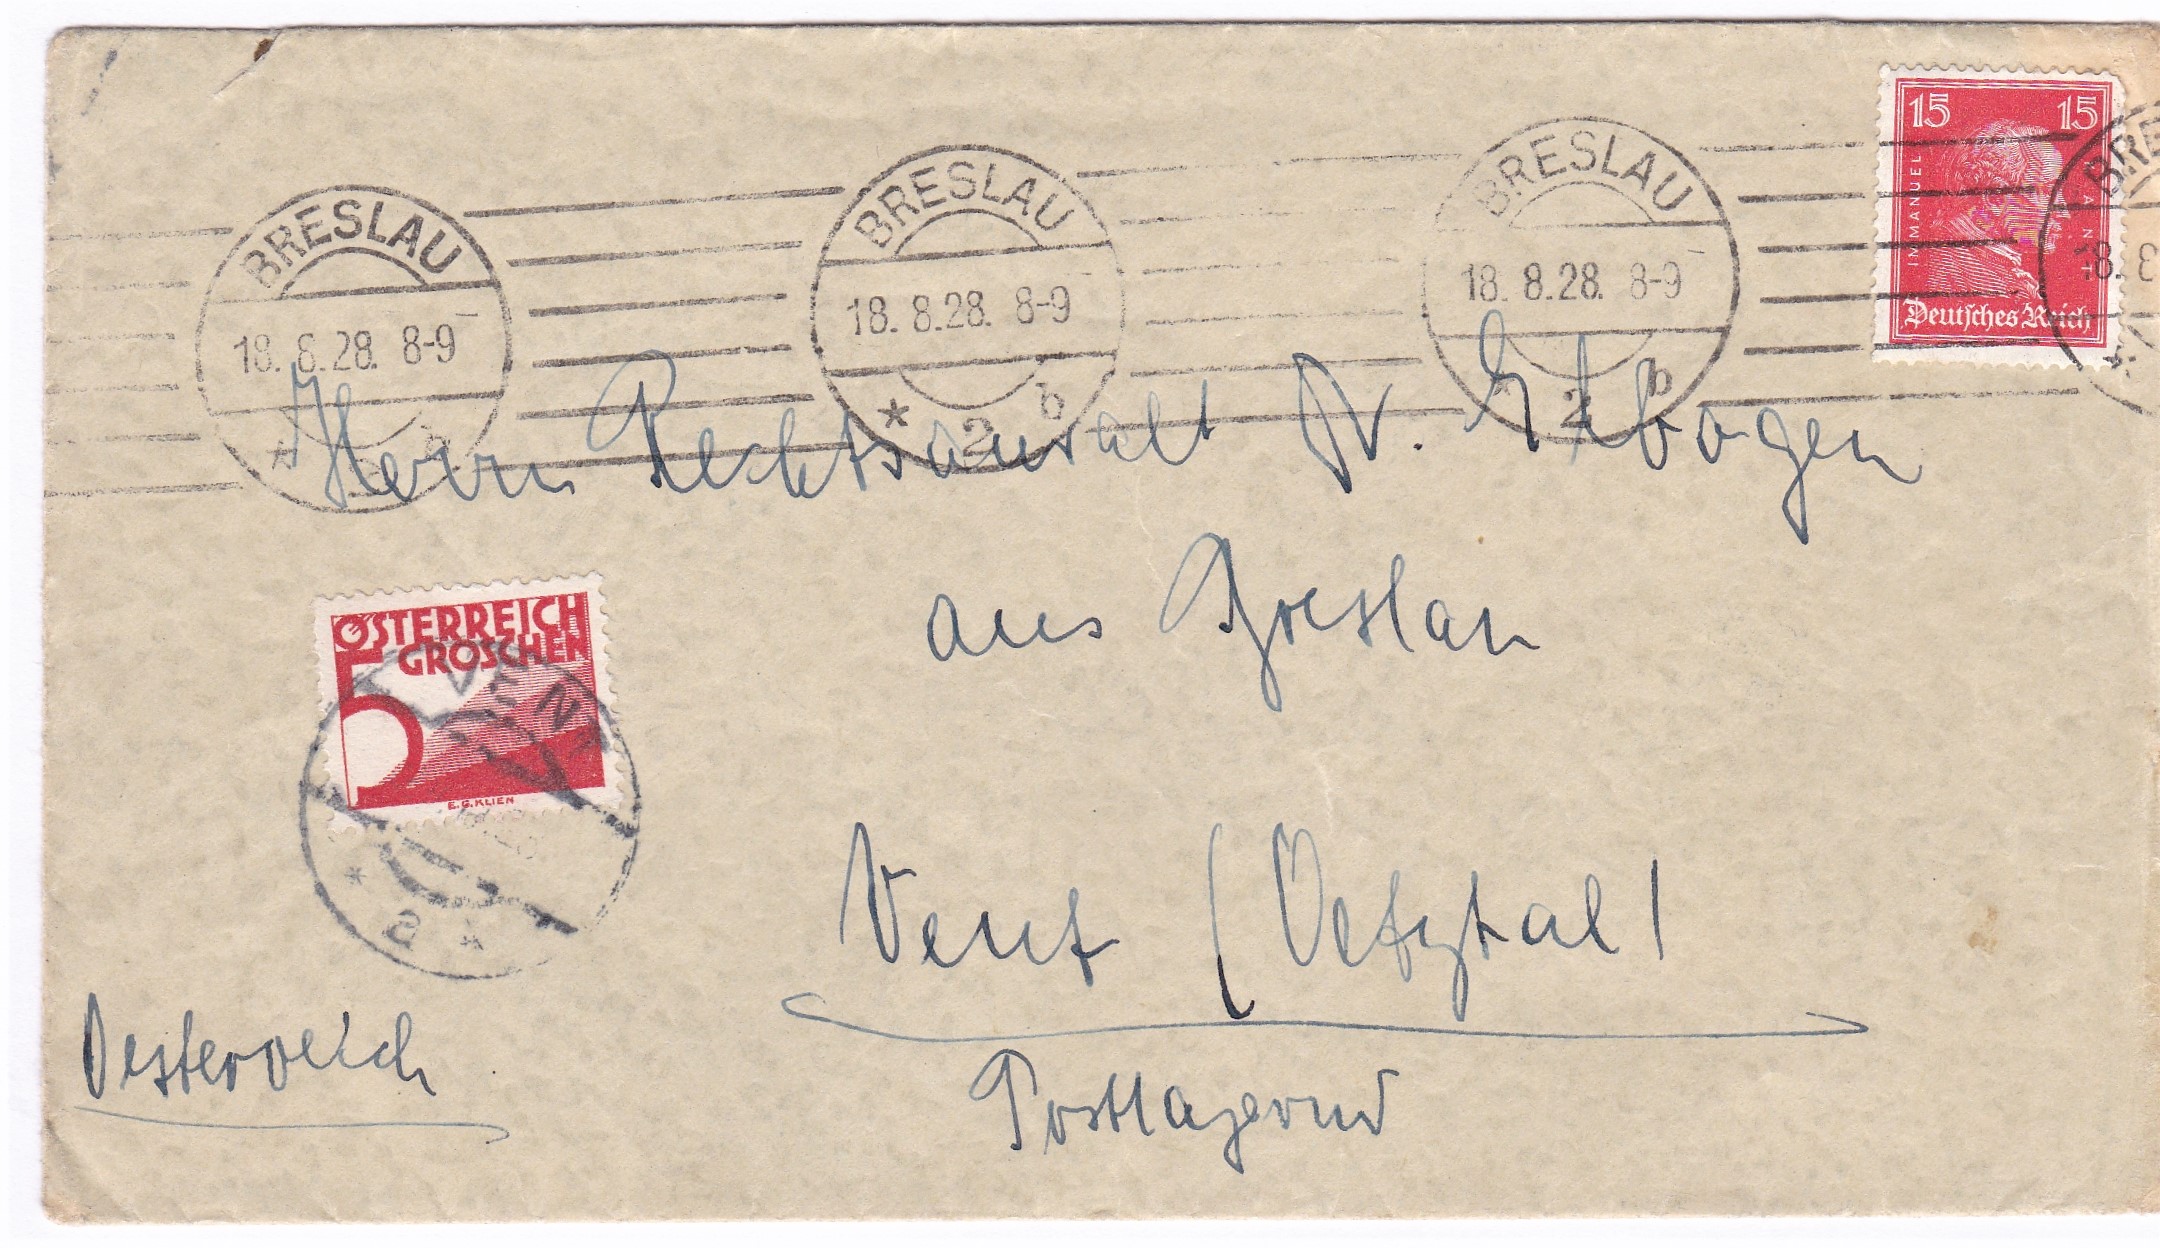 Germany 1928 envelope cancelled 18/8/1928 with a Breslau machine cancel on S.G. 406 15pf stamp